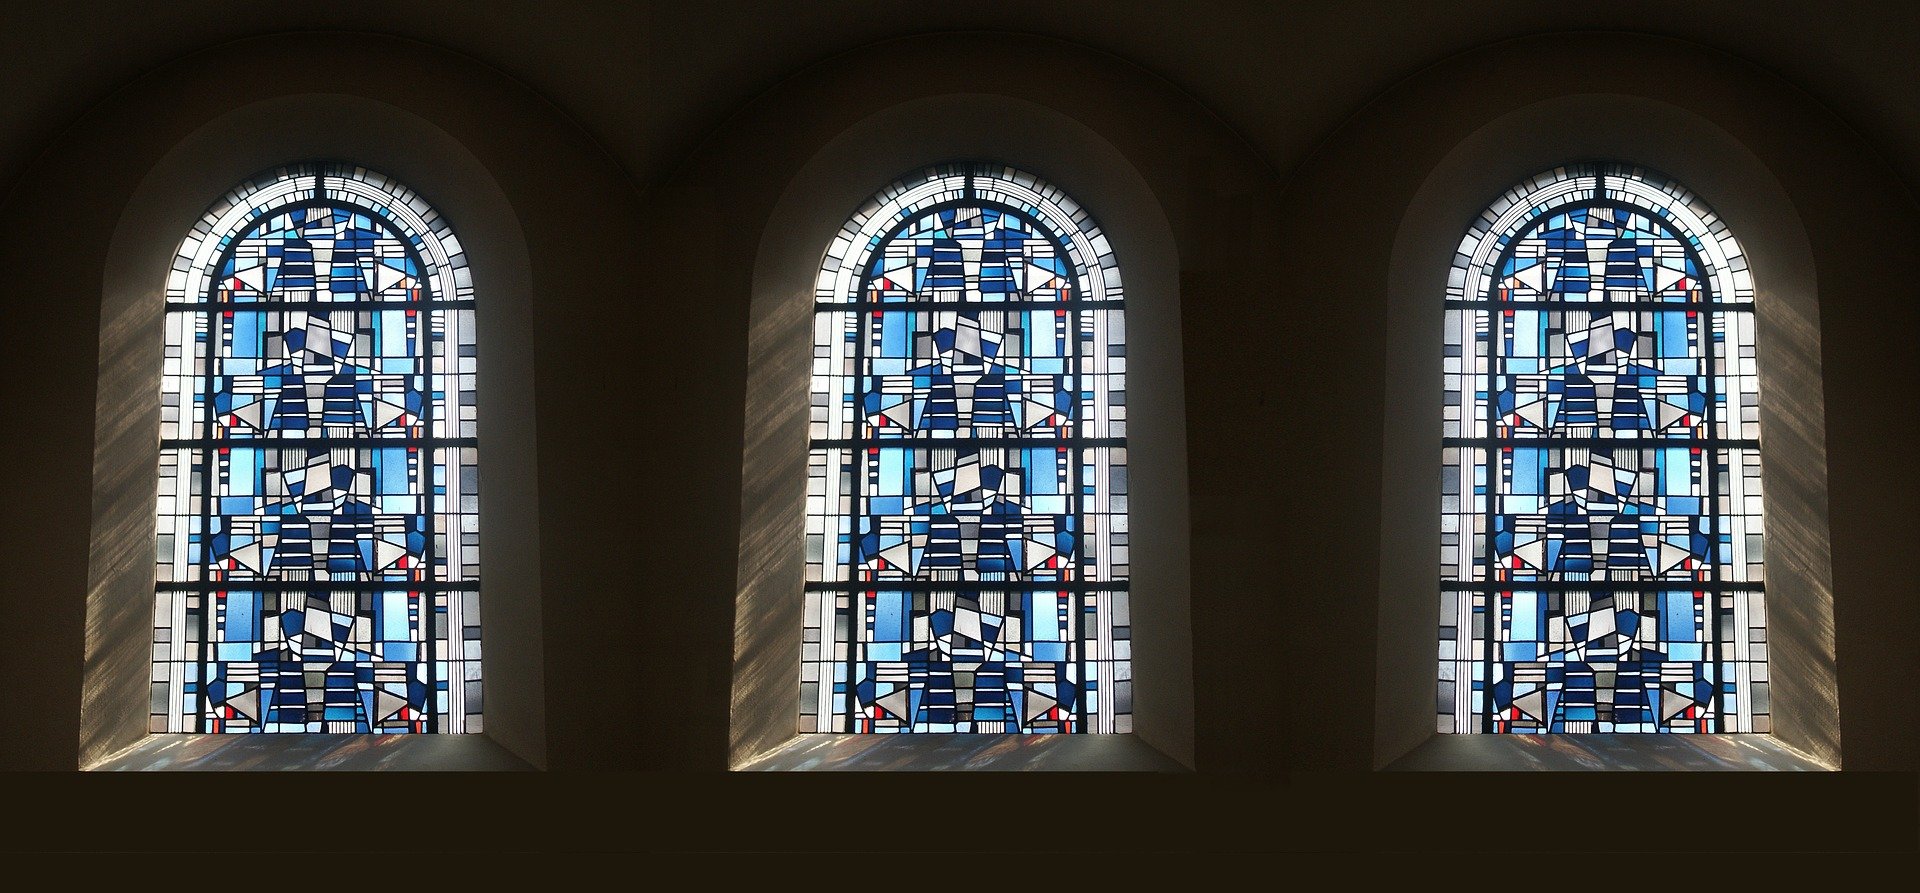 This image displays three windows with blue and white stained glass, with the sunliught shining  in.